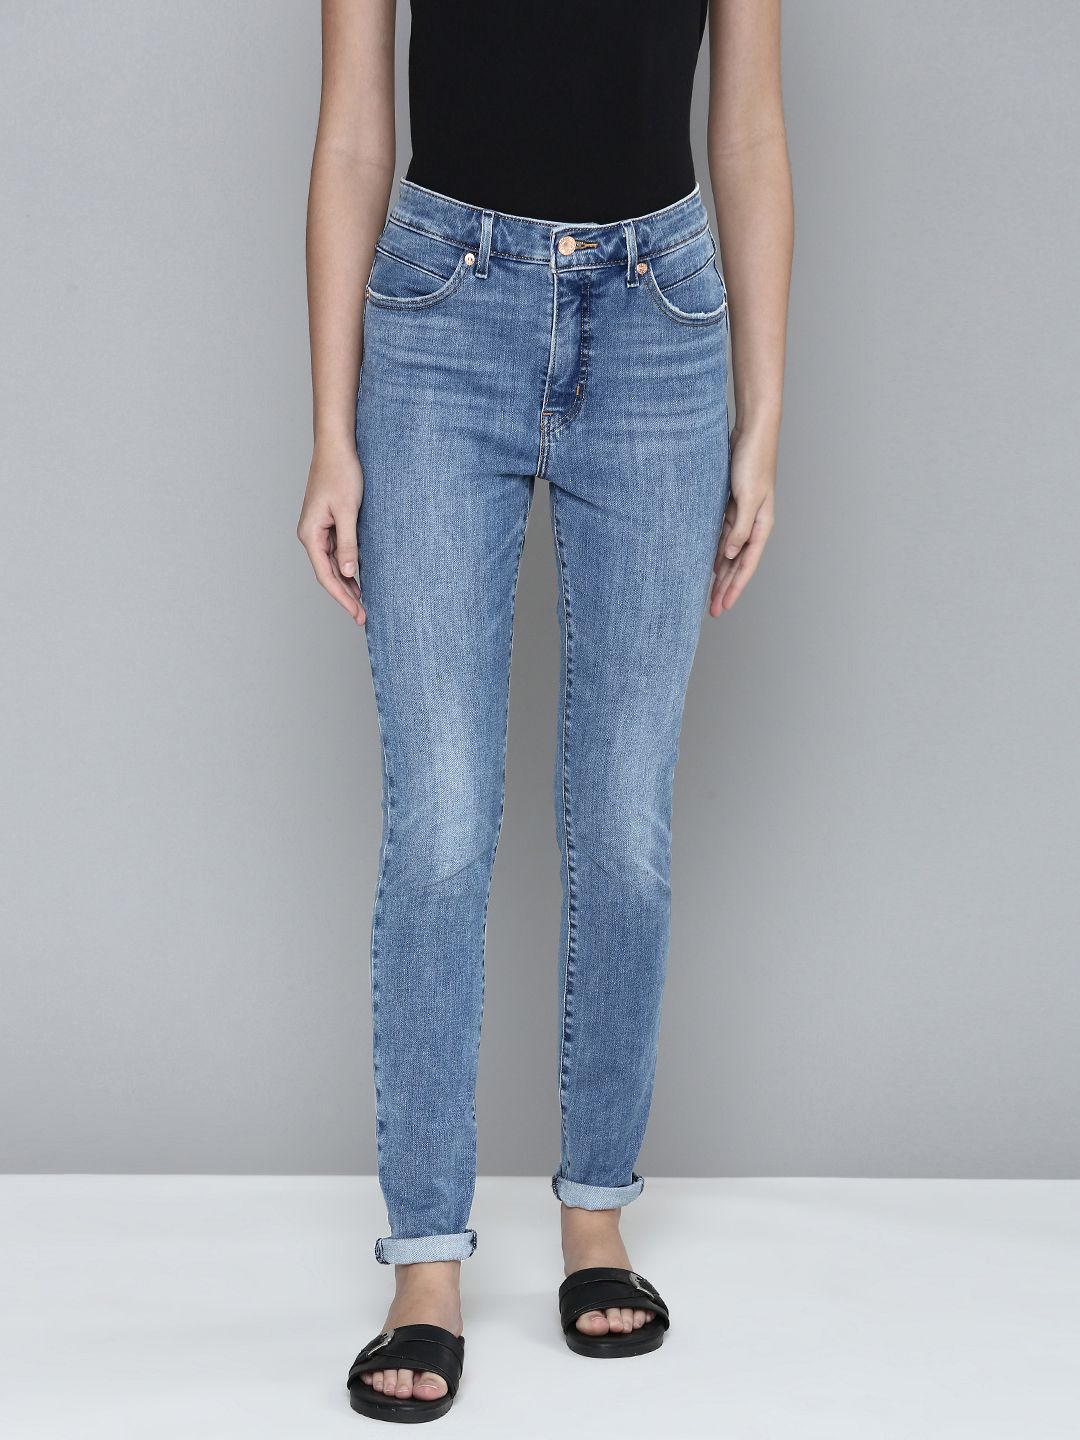 Levis Women Blue Skinny Fit Light Fade Stretchable Jeans Price in India